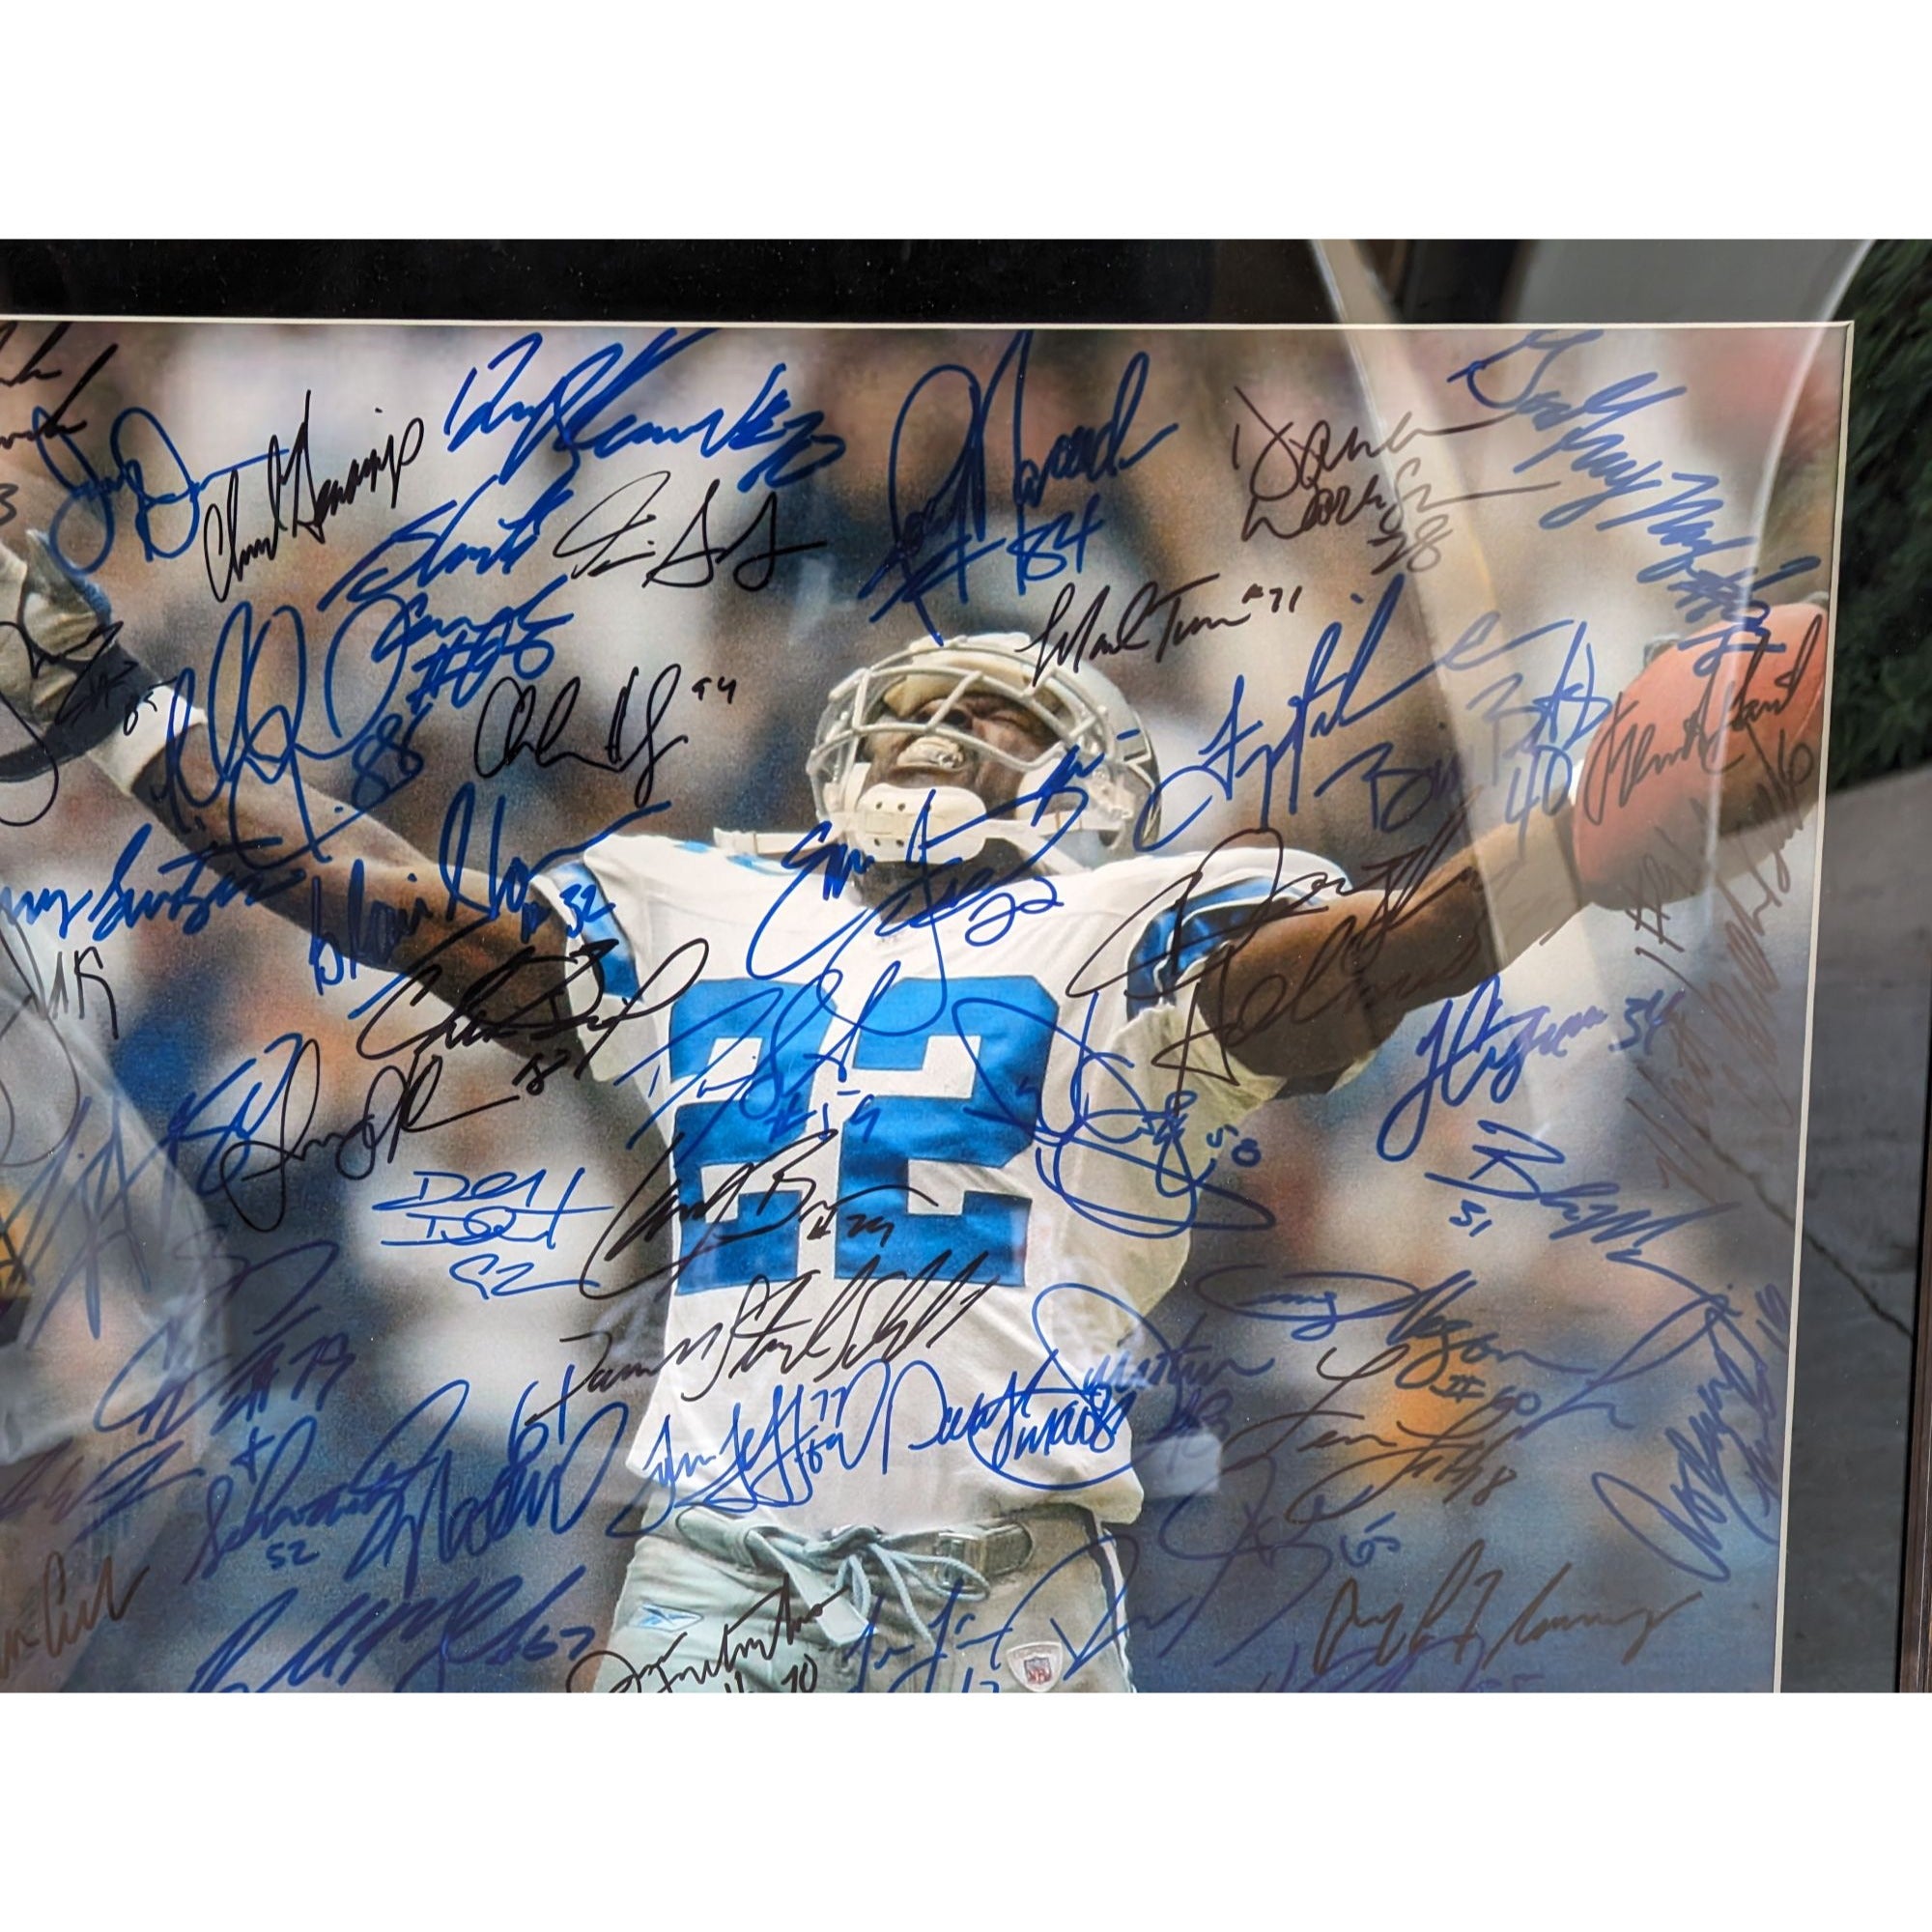 Dallas Cowboys 1992-93 Super Bowl champions team signed photo with proof